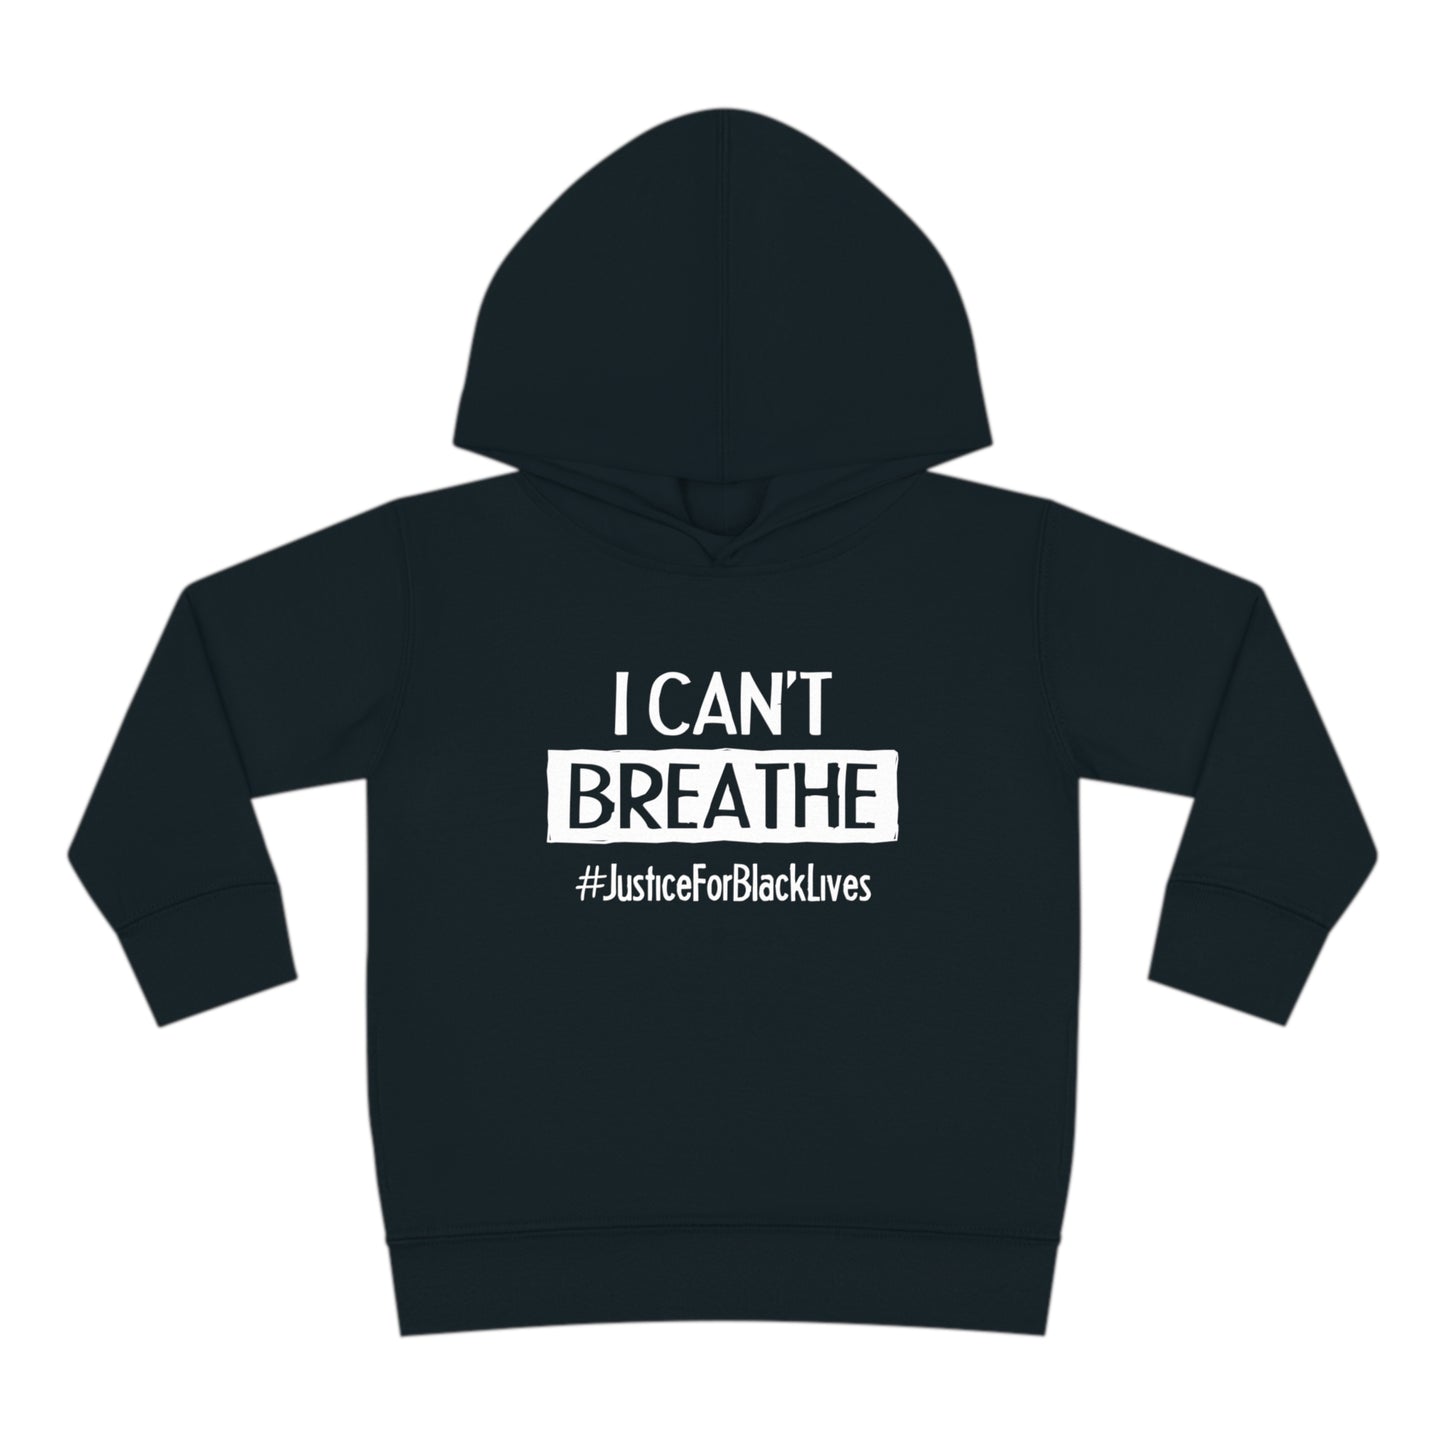 “I Can't Breathe” Toddler Hoodie